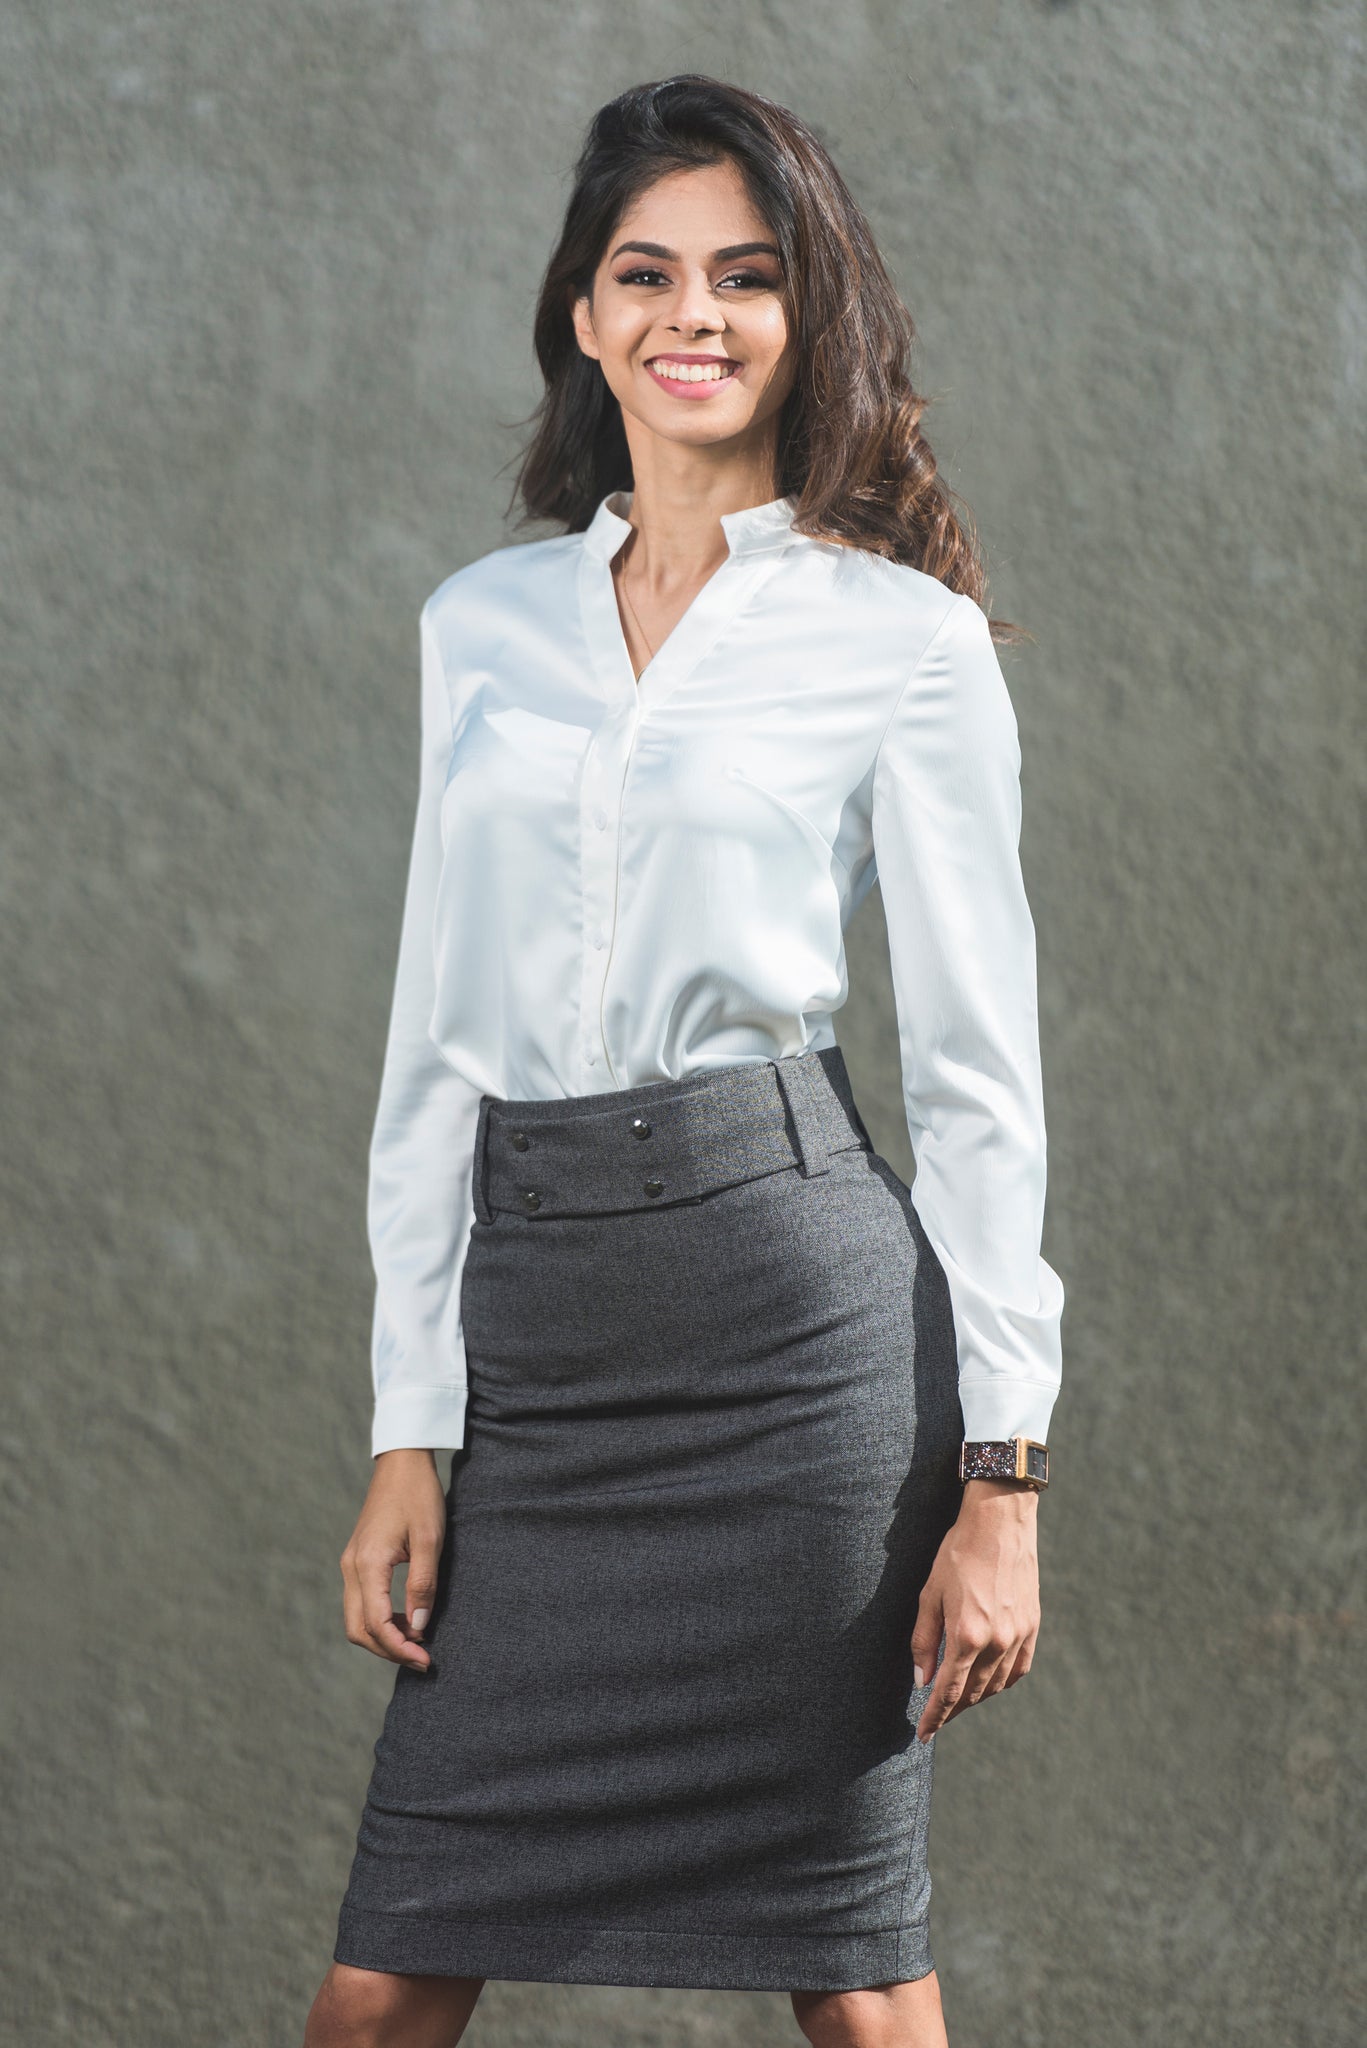 Long Sleeved Corporate Blouse - White